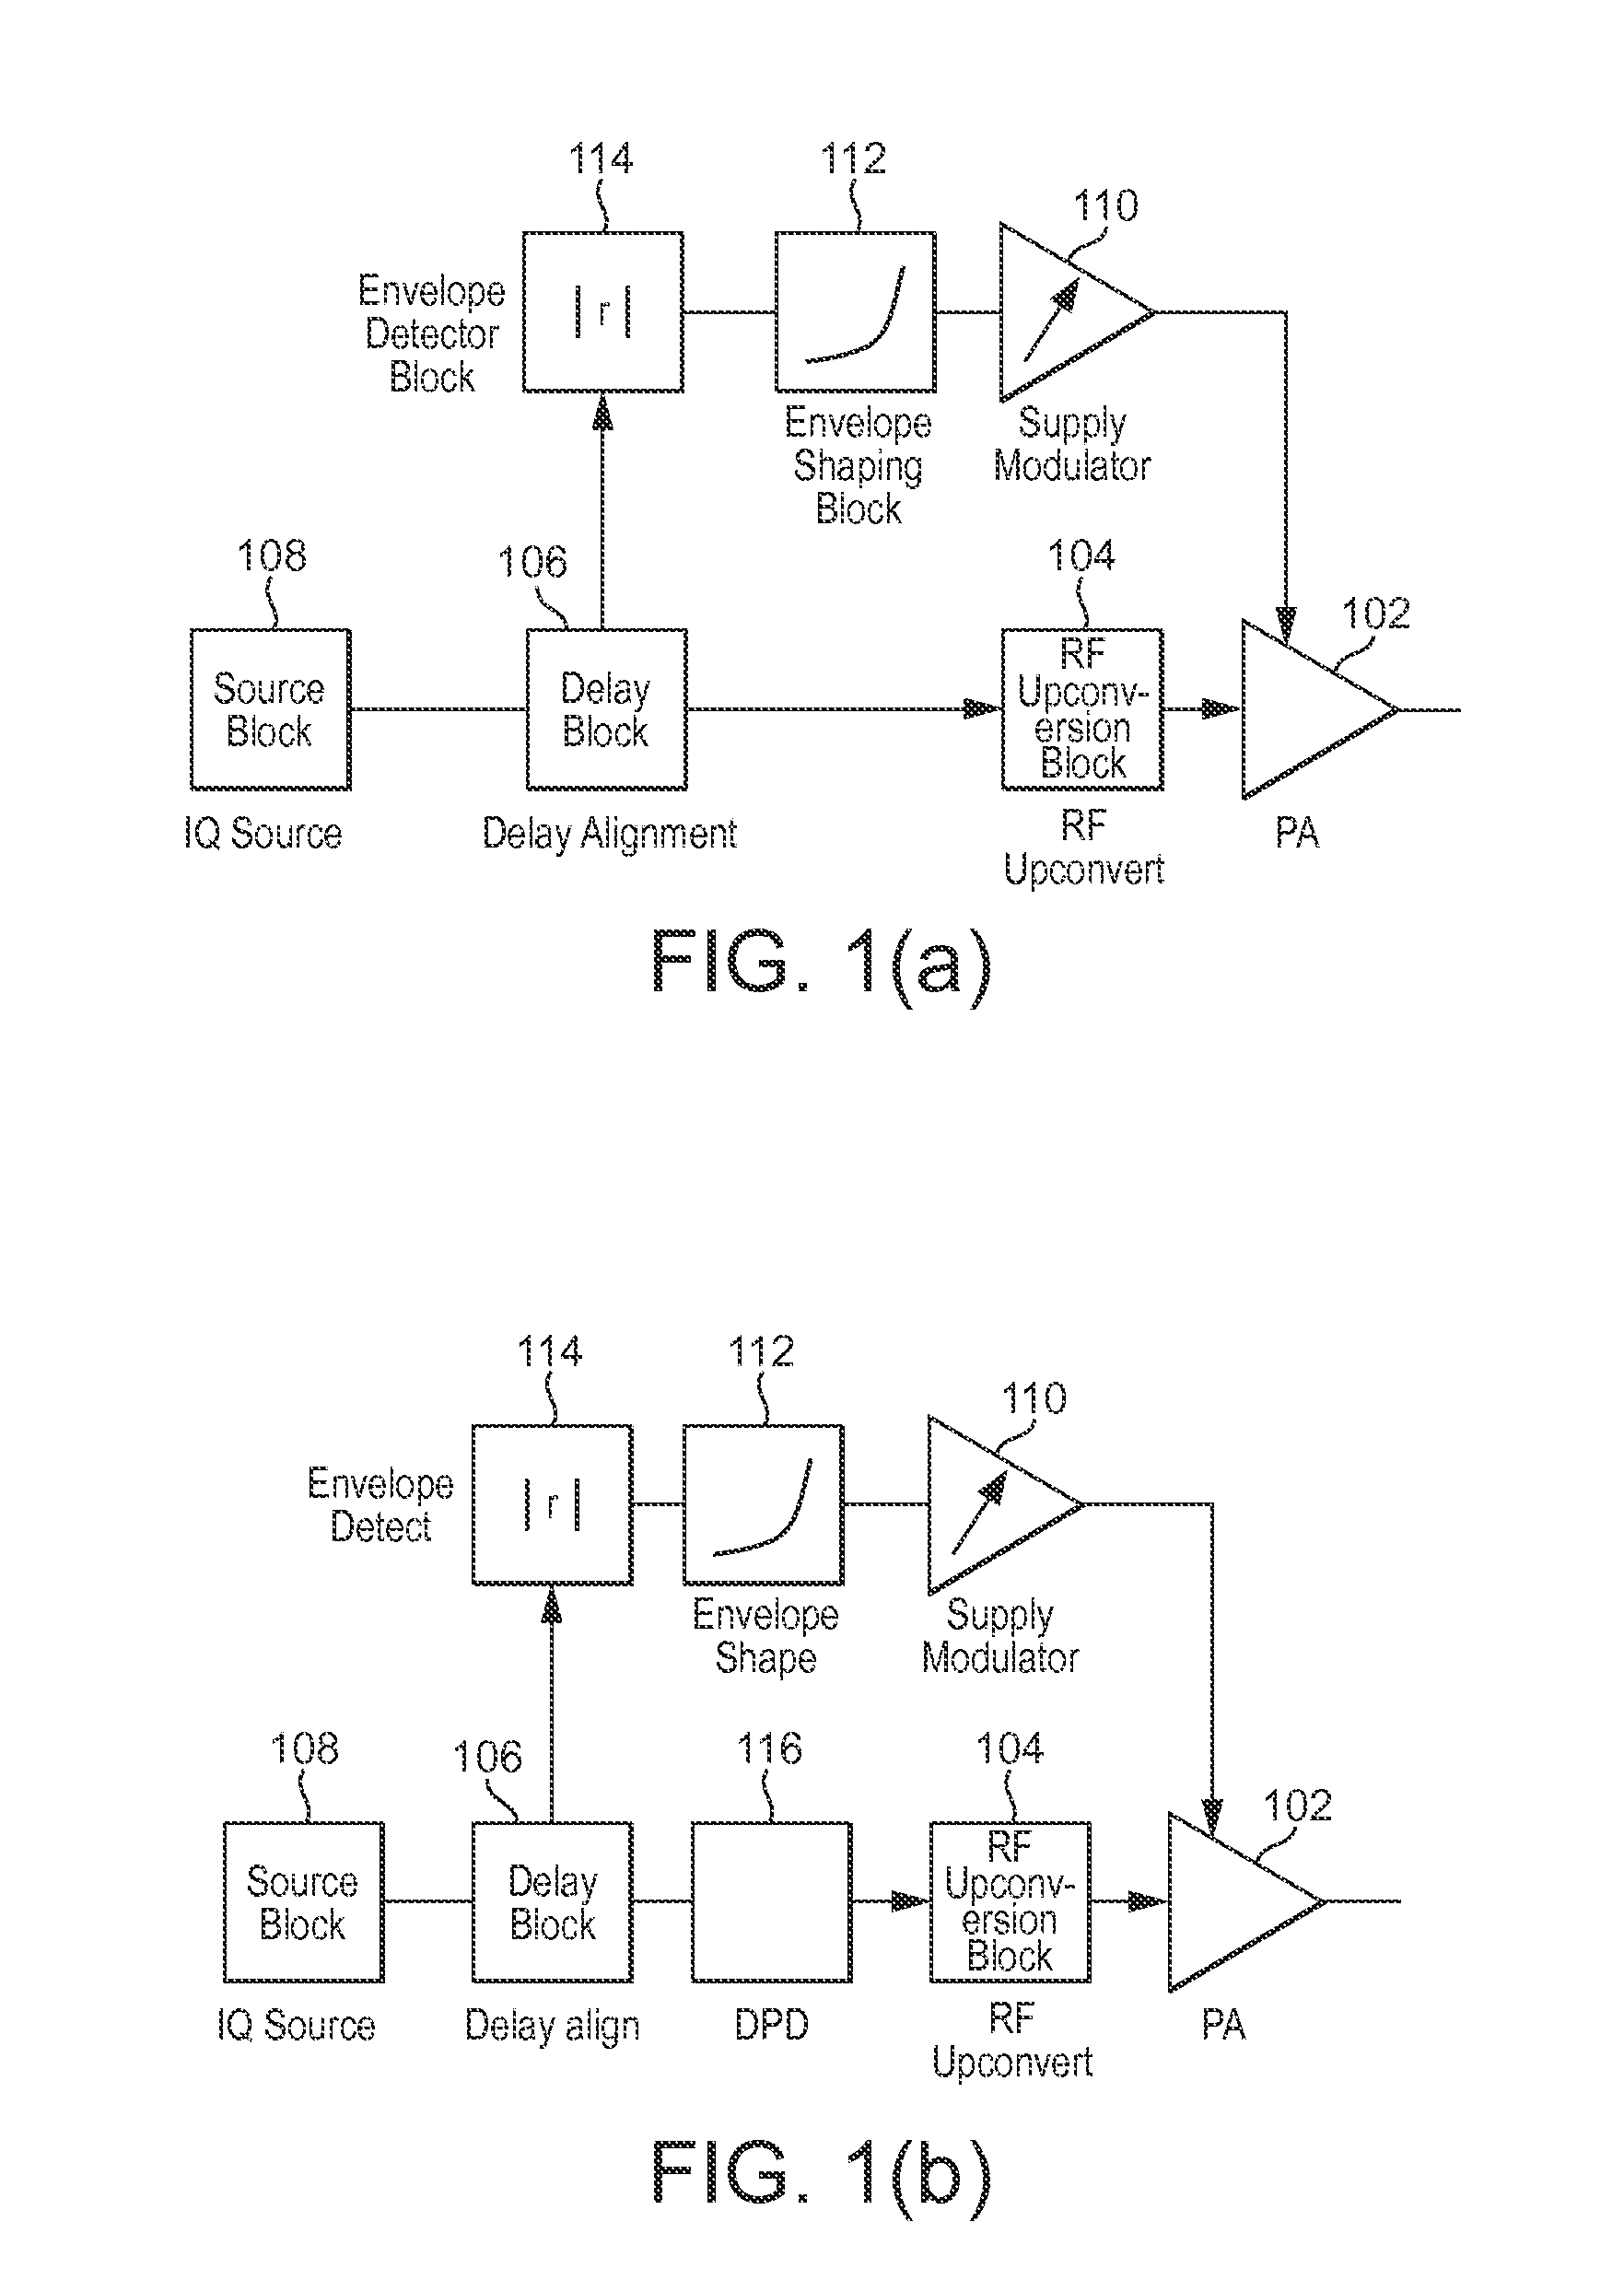 Reduced bandwith of signal in an envelope path for envelope tracking system